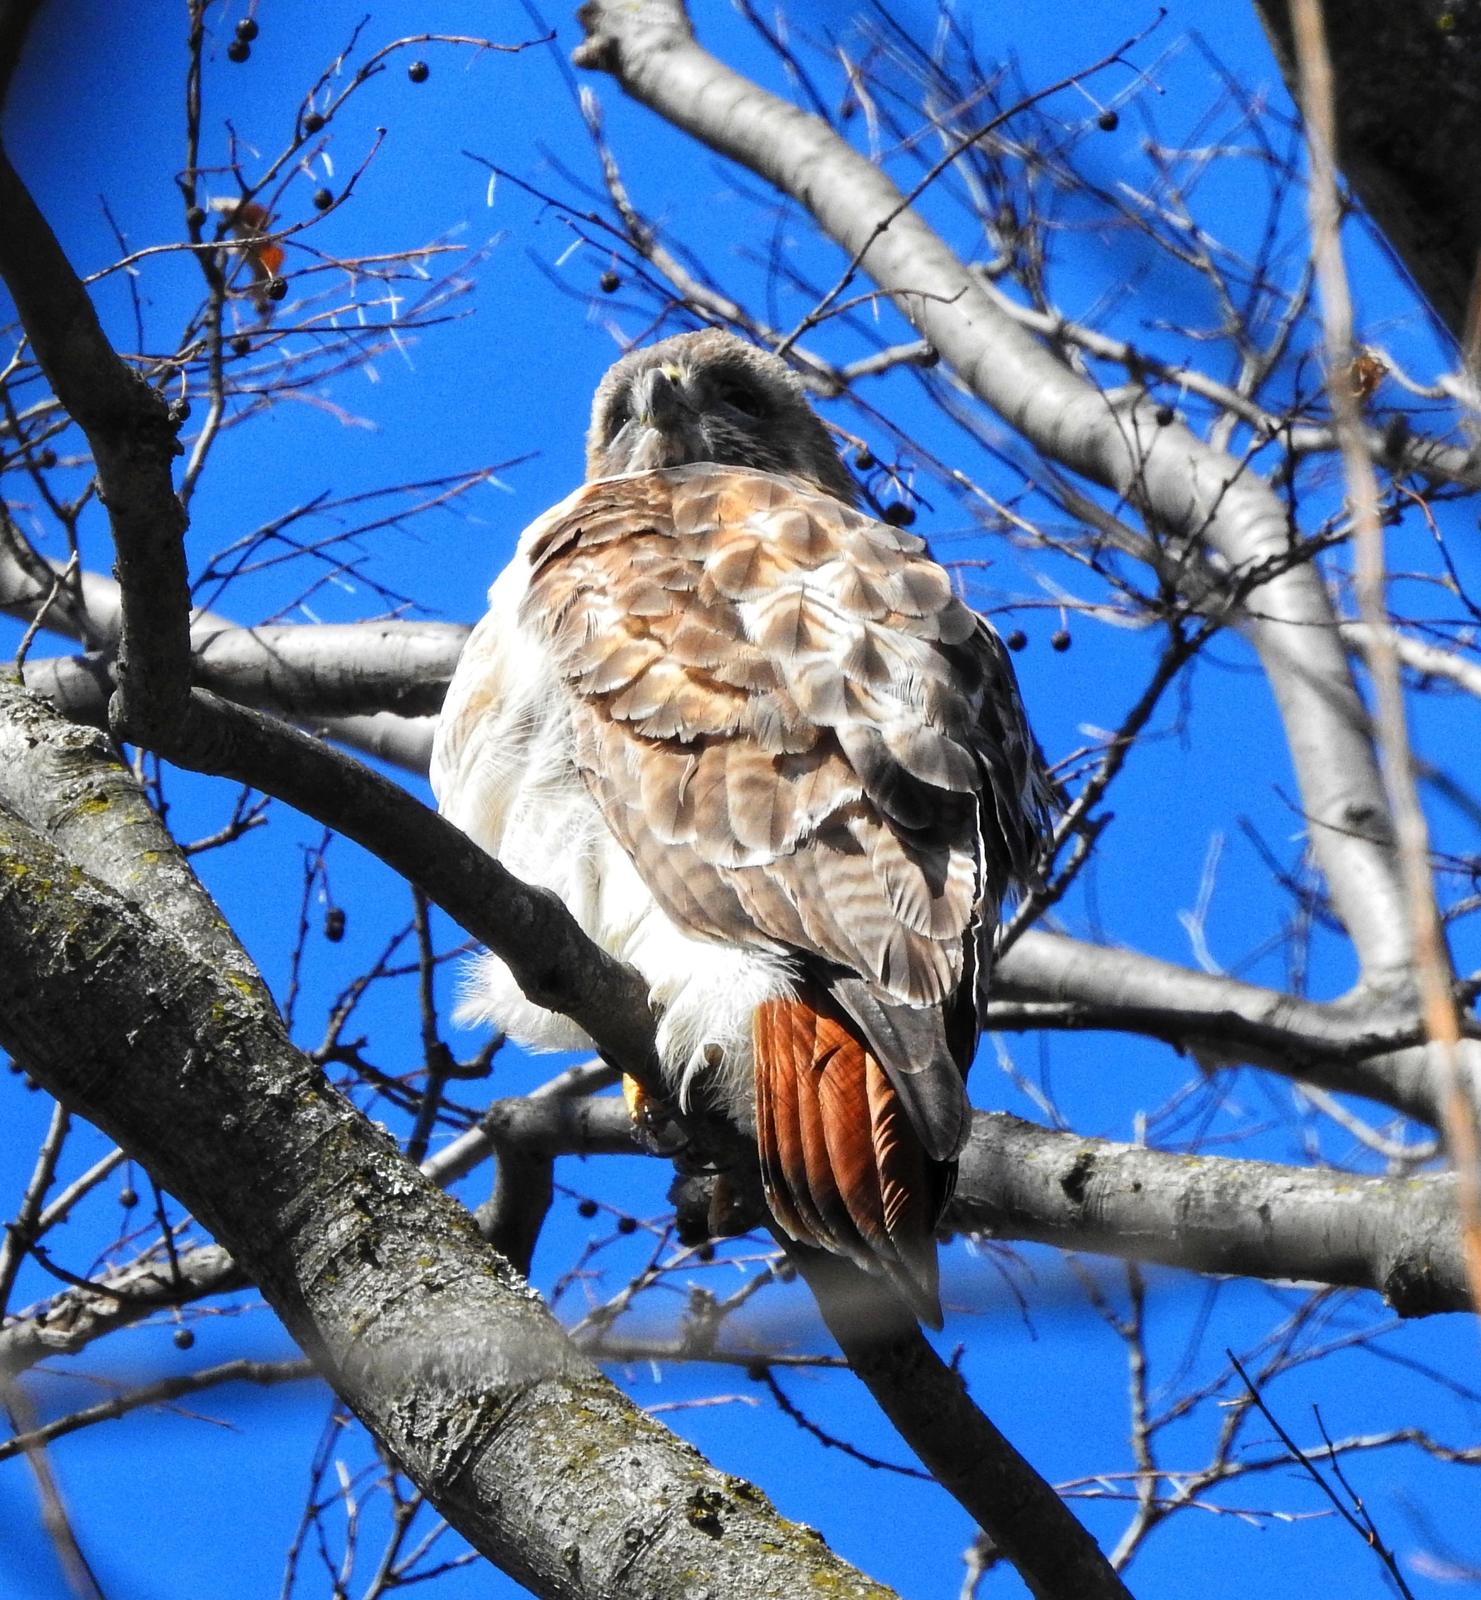 Red-tailed Hawk (calurus/alascensis) Photo by Steven Kleiman